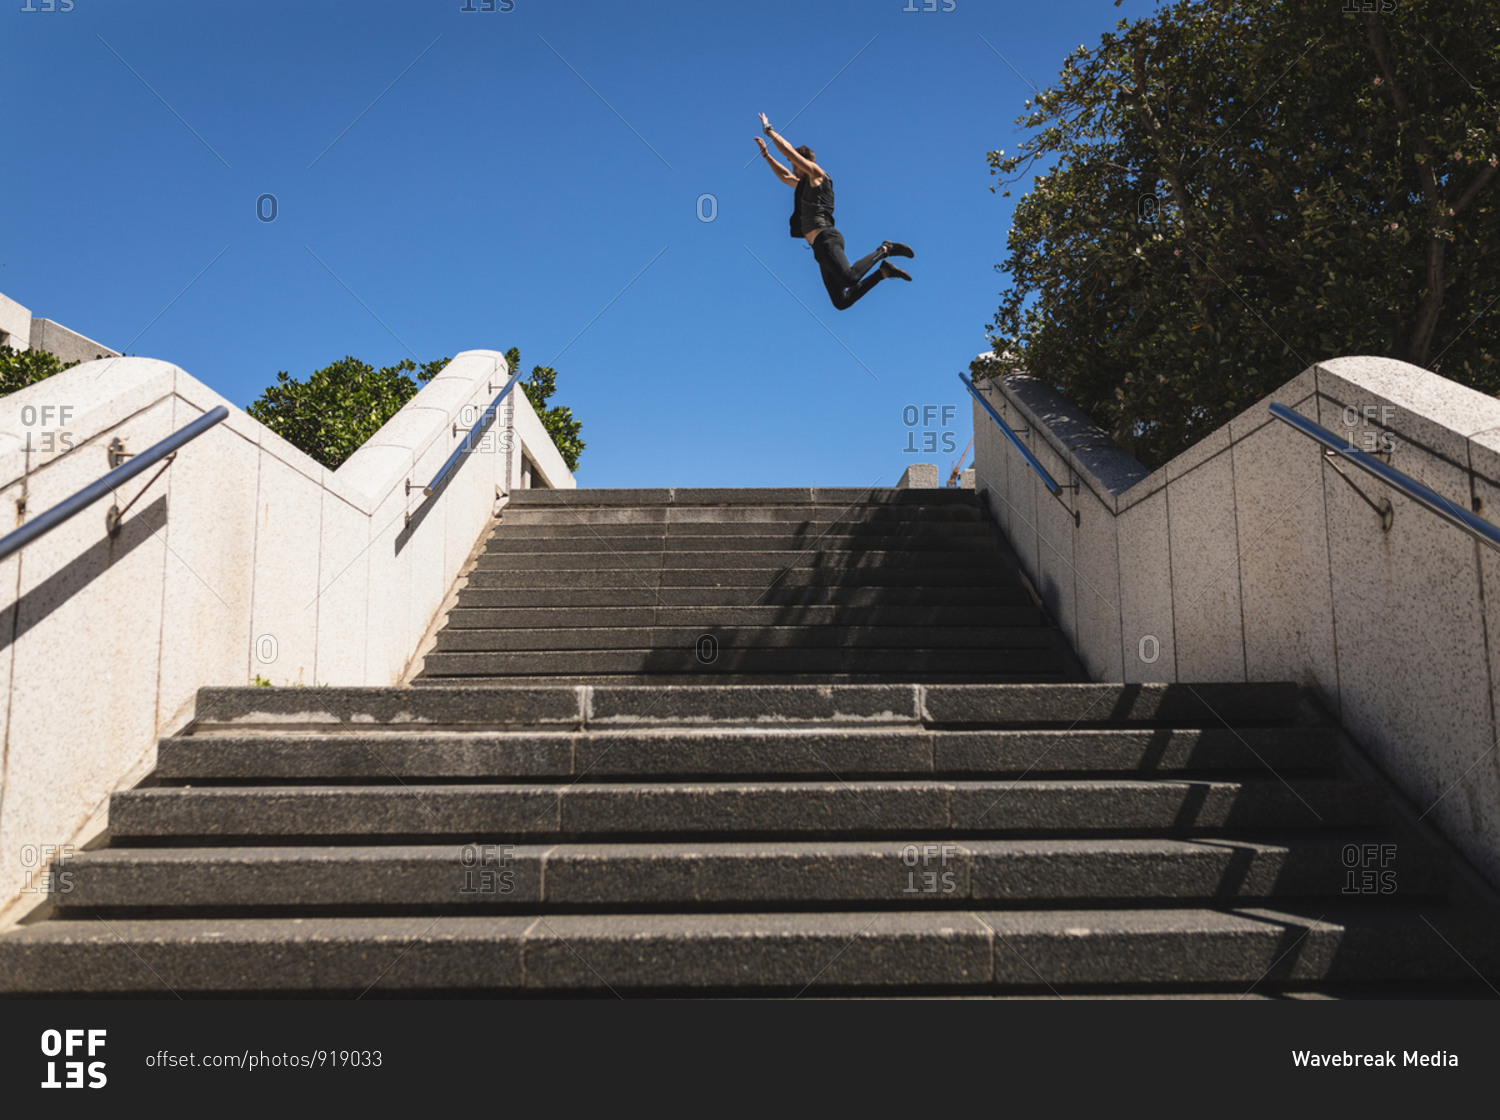 Side view of a Caucasian man practicing parkour by the building in a city on a sunny day, jumping above stairs.